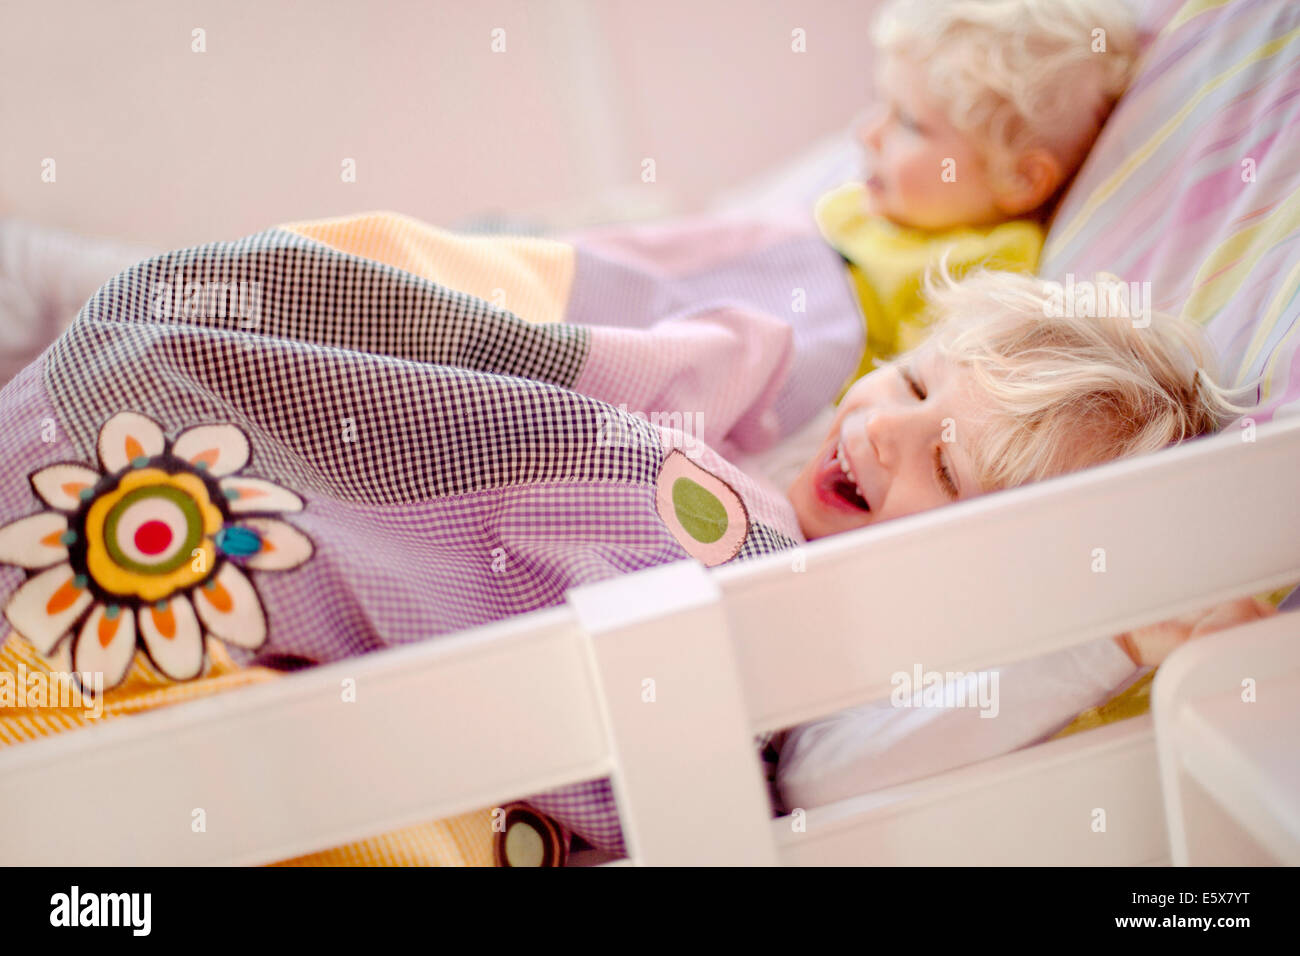 Two young brothers lying in bed, one laughing Stock Photo